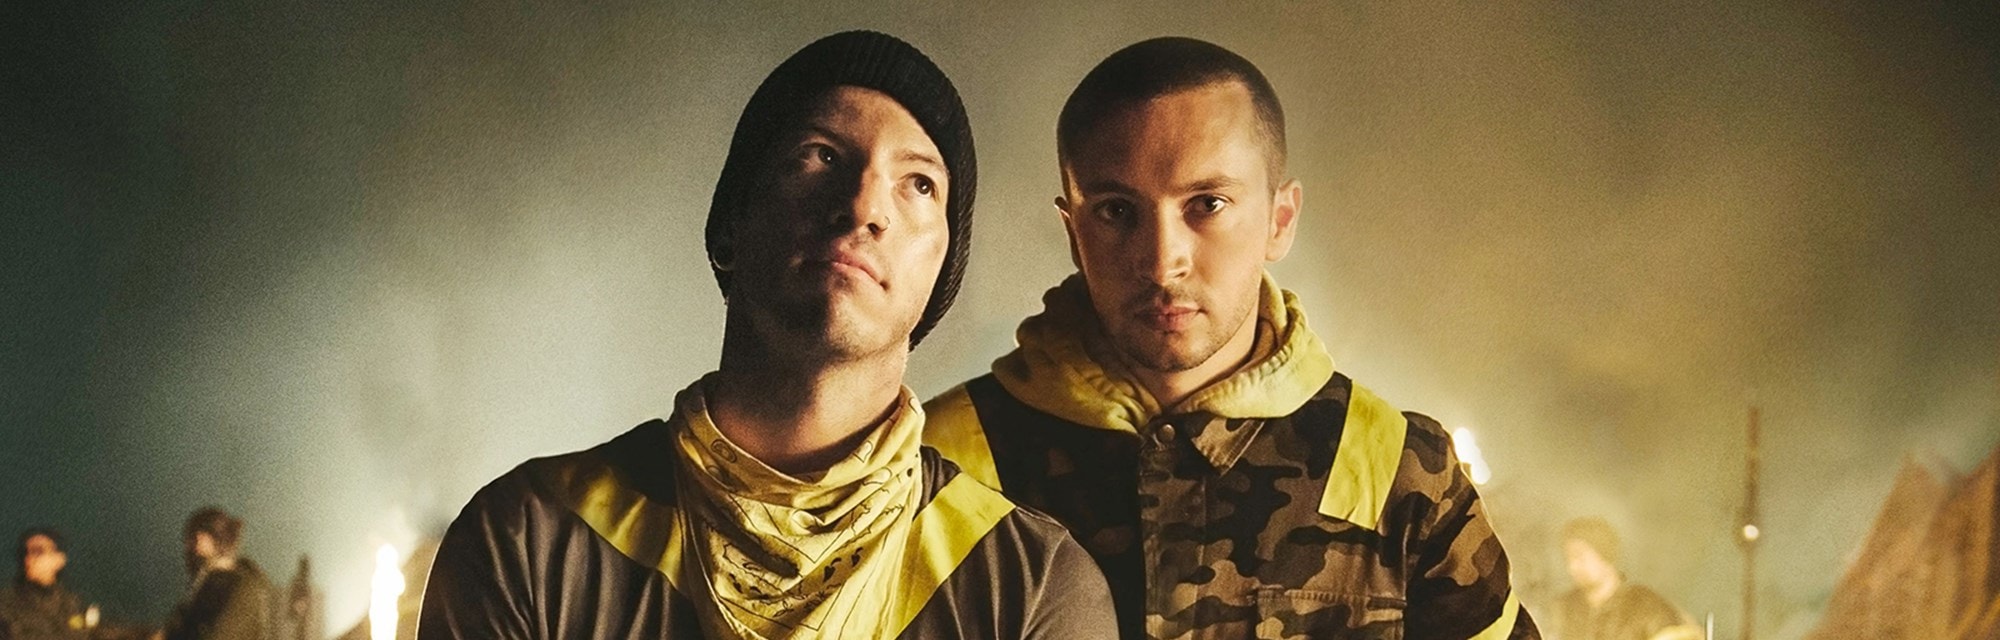 The oddball duo follow-up their megahit LP Blurryface this week with the  release of new album Trench. Here is everything you need to know about  it... | HMV Store